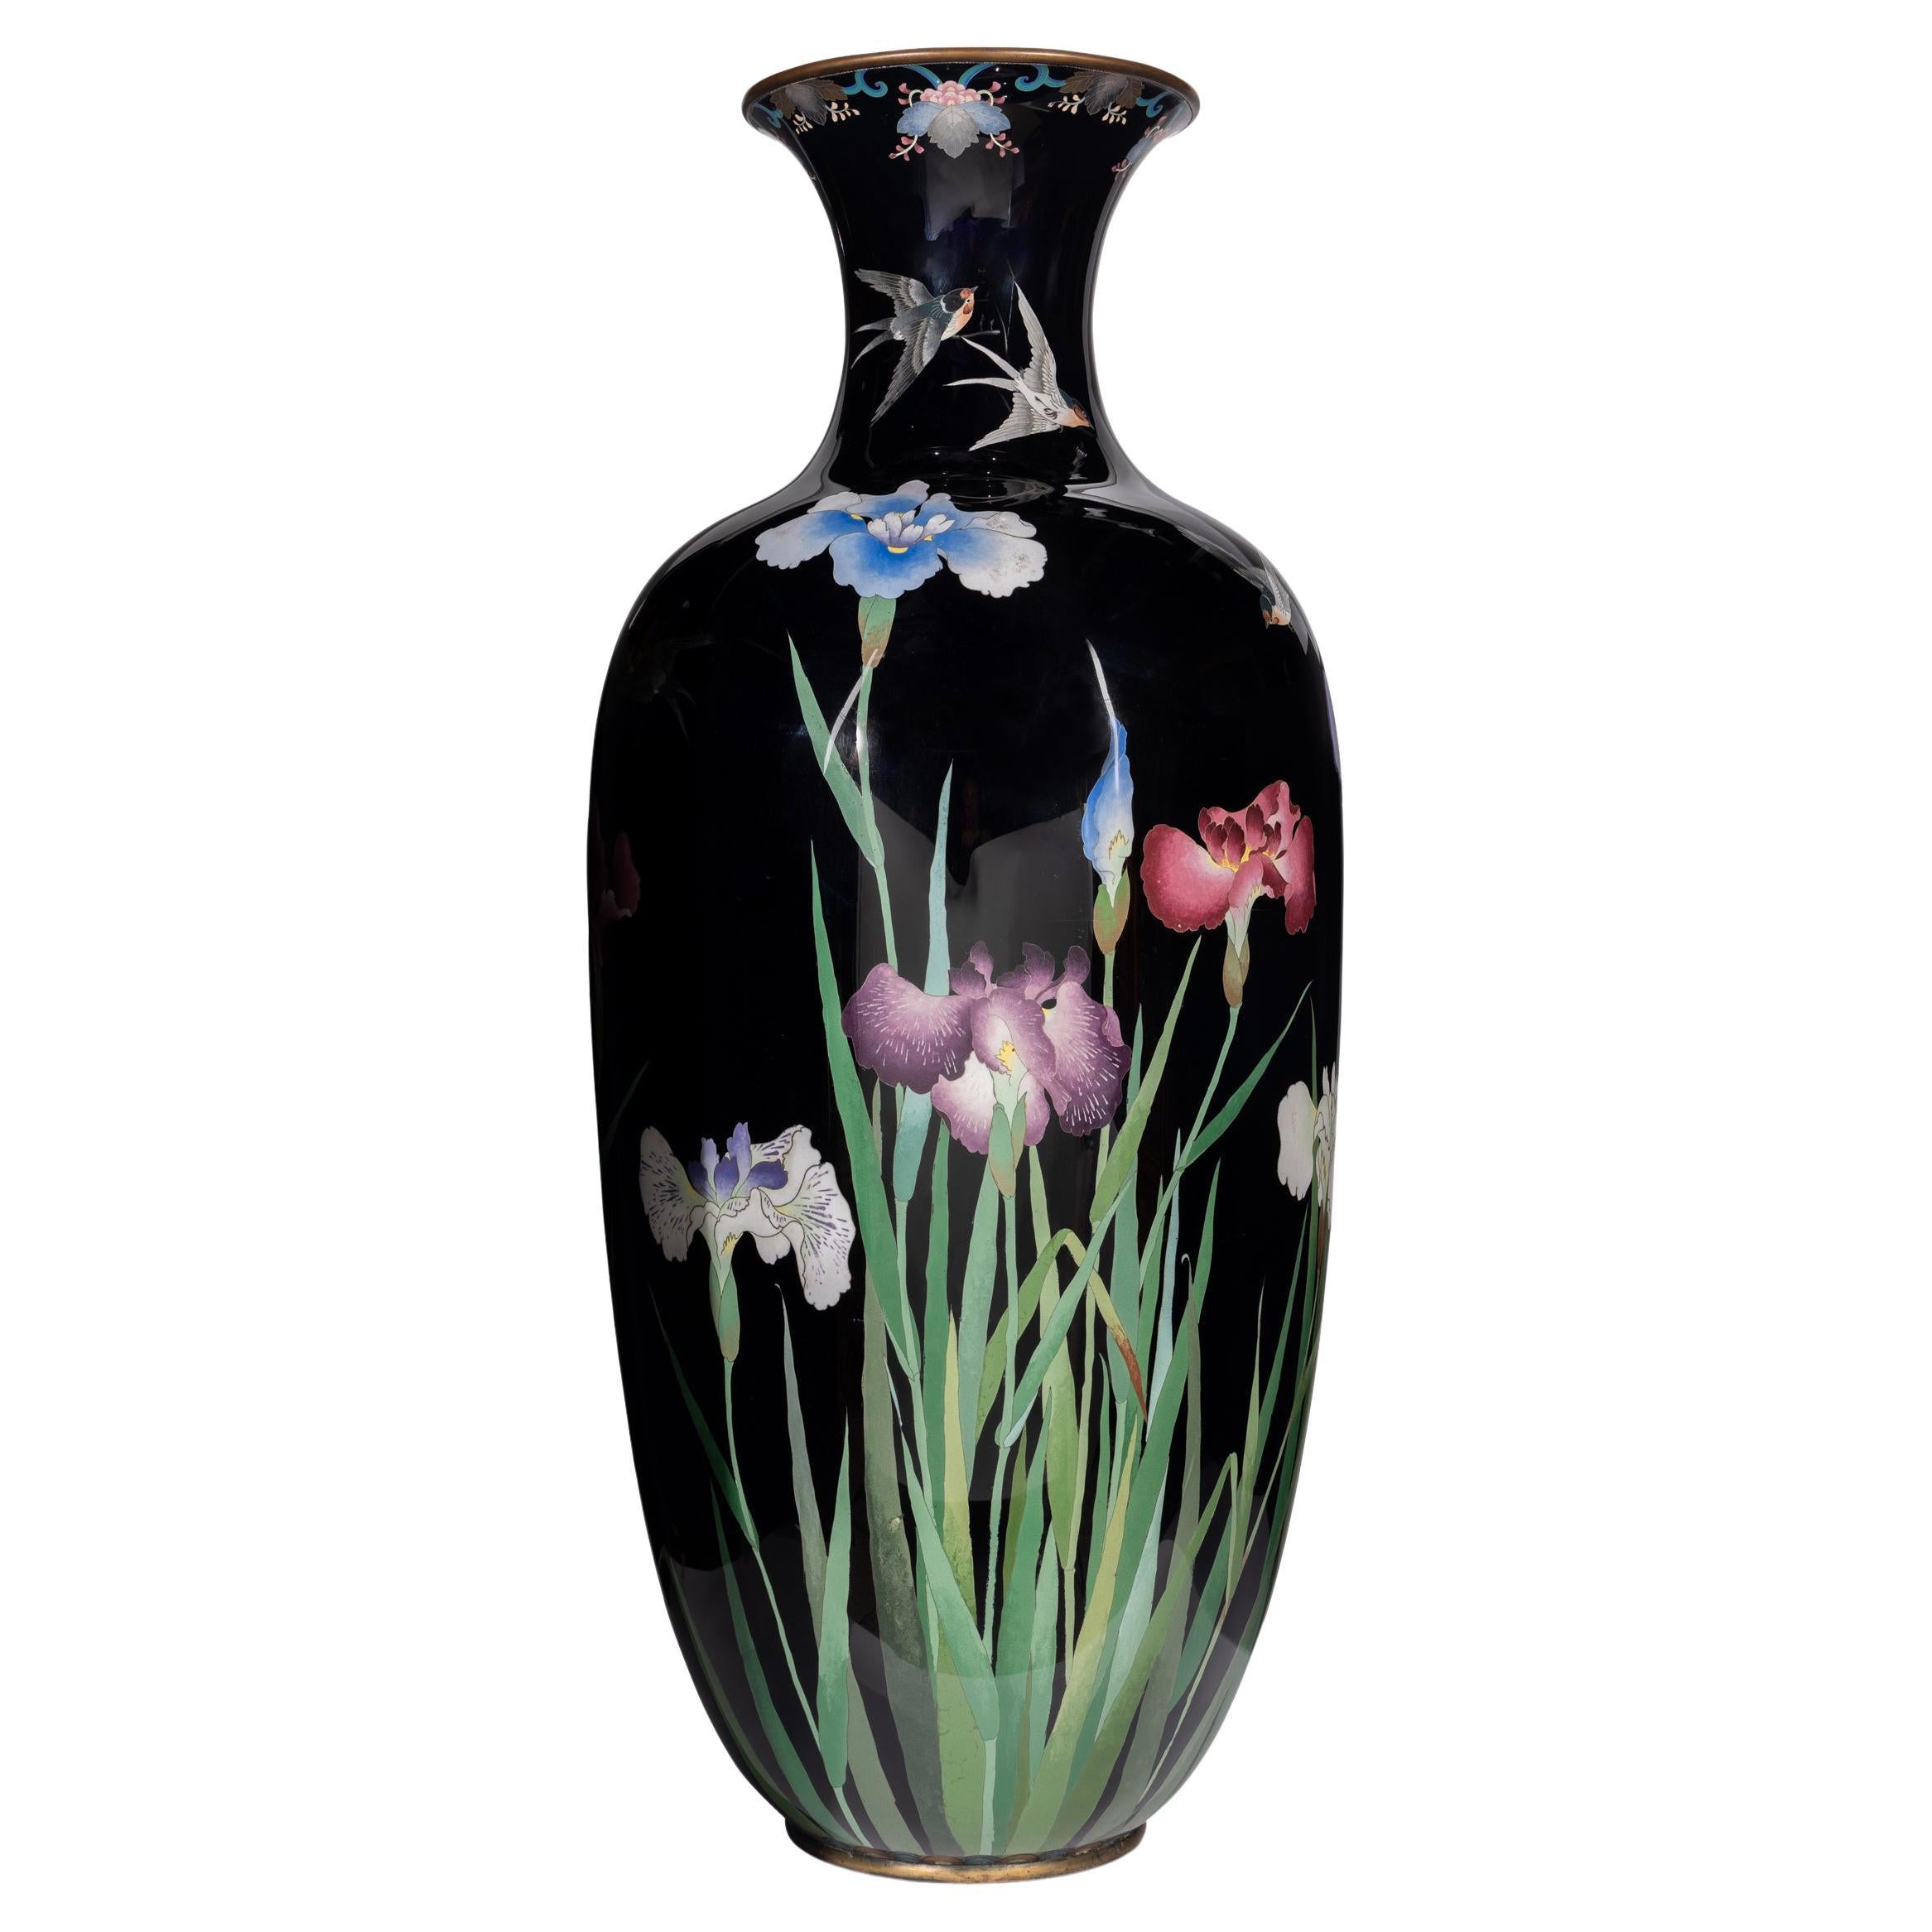 Palace-Sized Japanese Cloisonne Enamel Vase Adorned with Irises and Sparrows For Sale